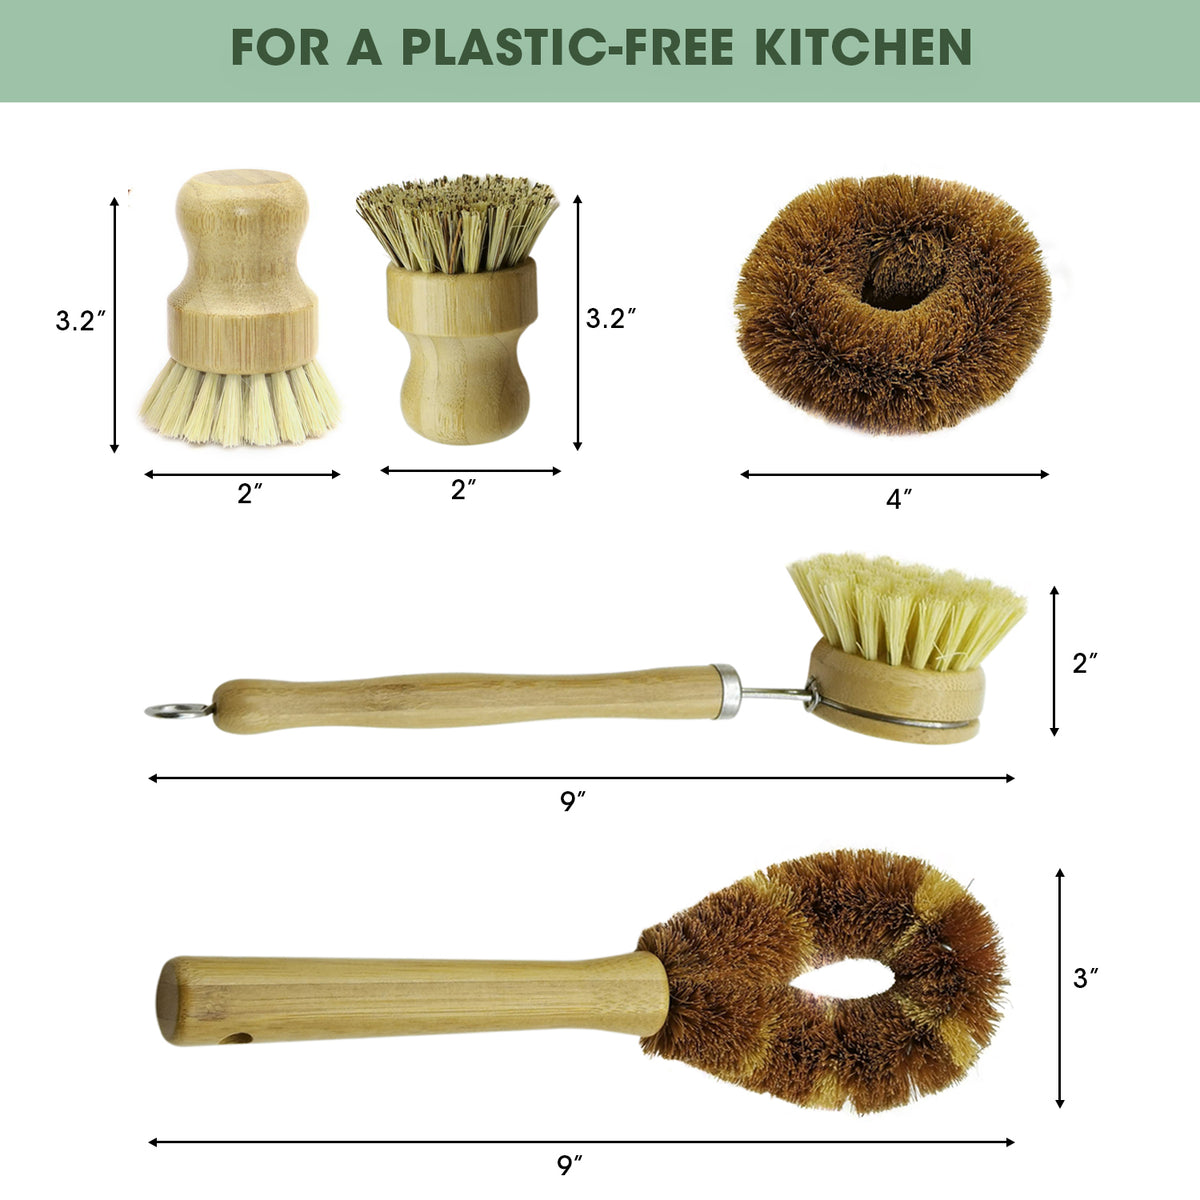 5 Pieces Bamboo Dish Brush Set for Eco-friendly Home - Wooden Dish Scr